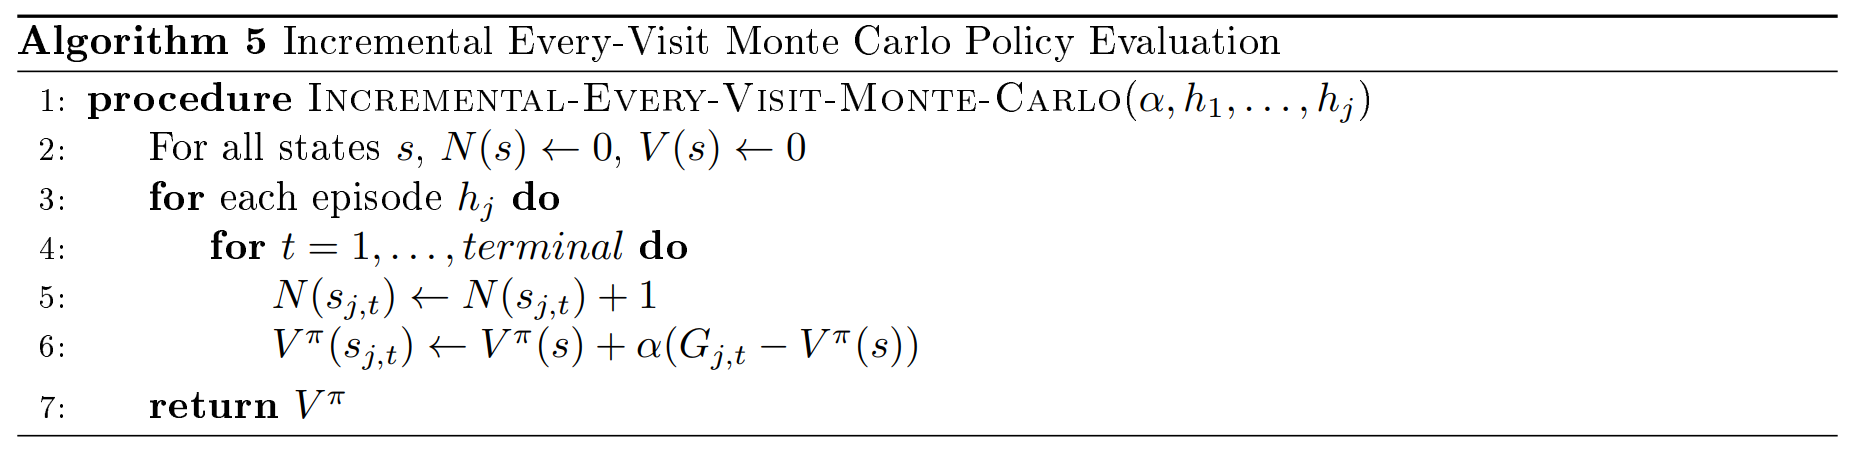 docs/stanford-cs234-notes-zh/img/fig3_alg_5.png